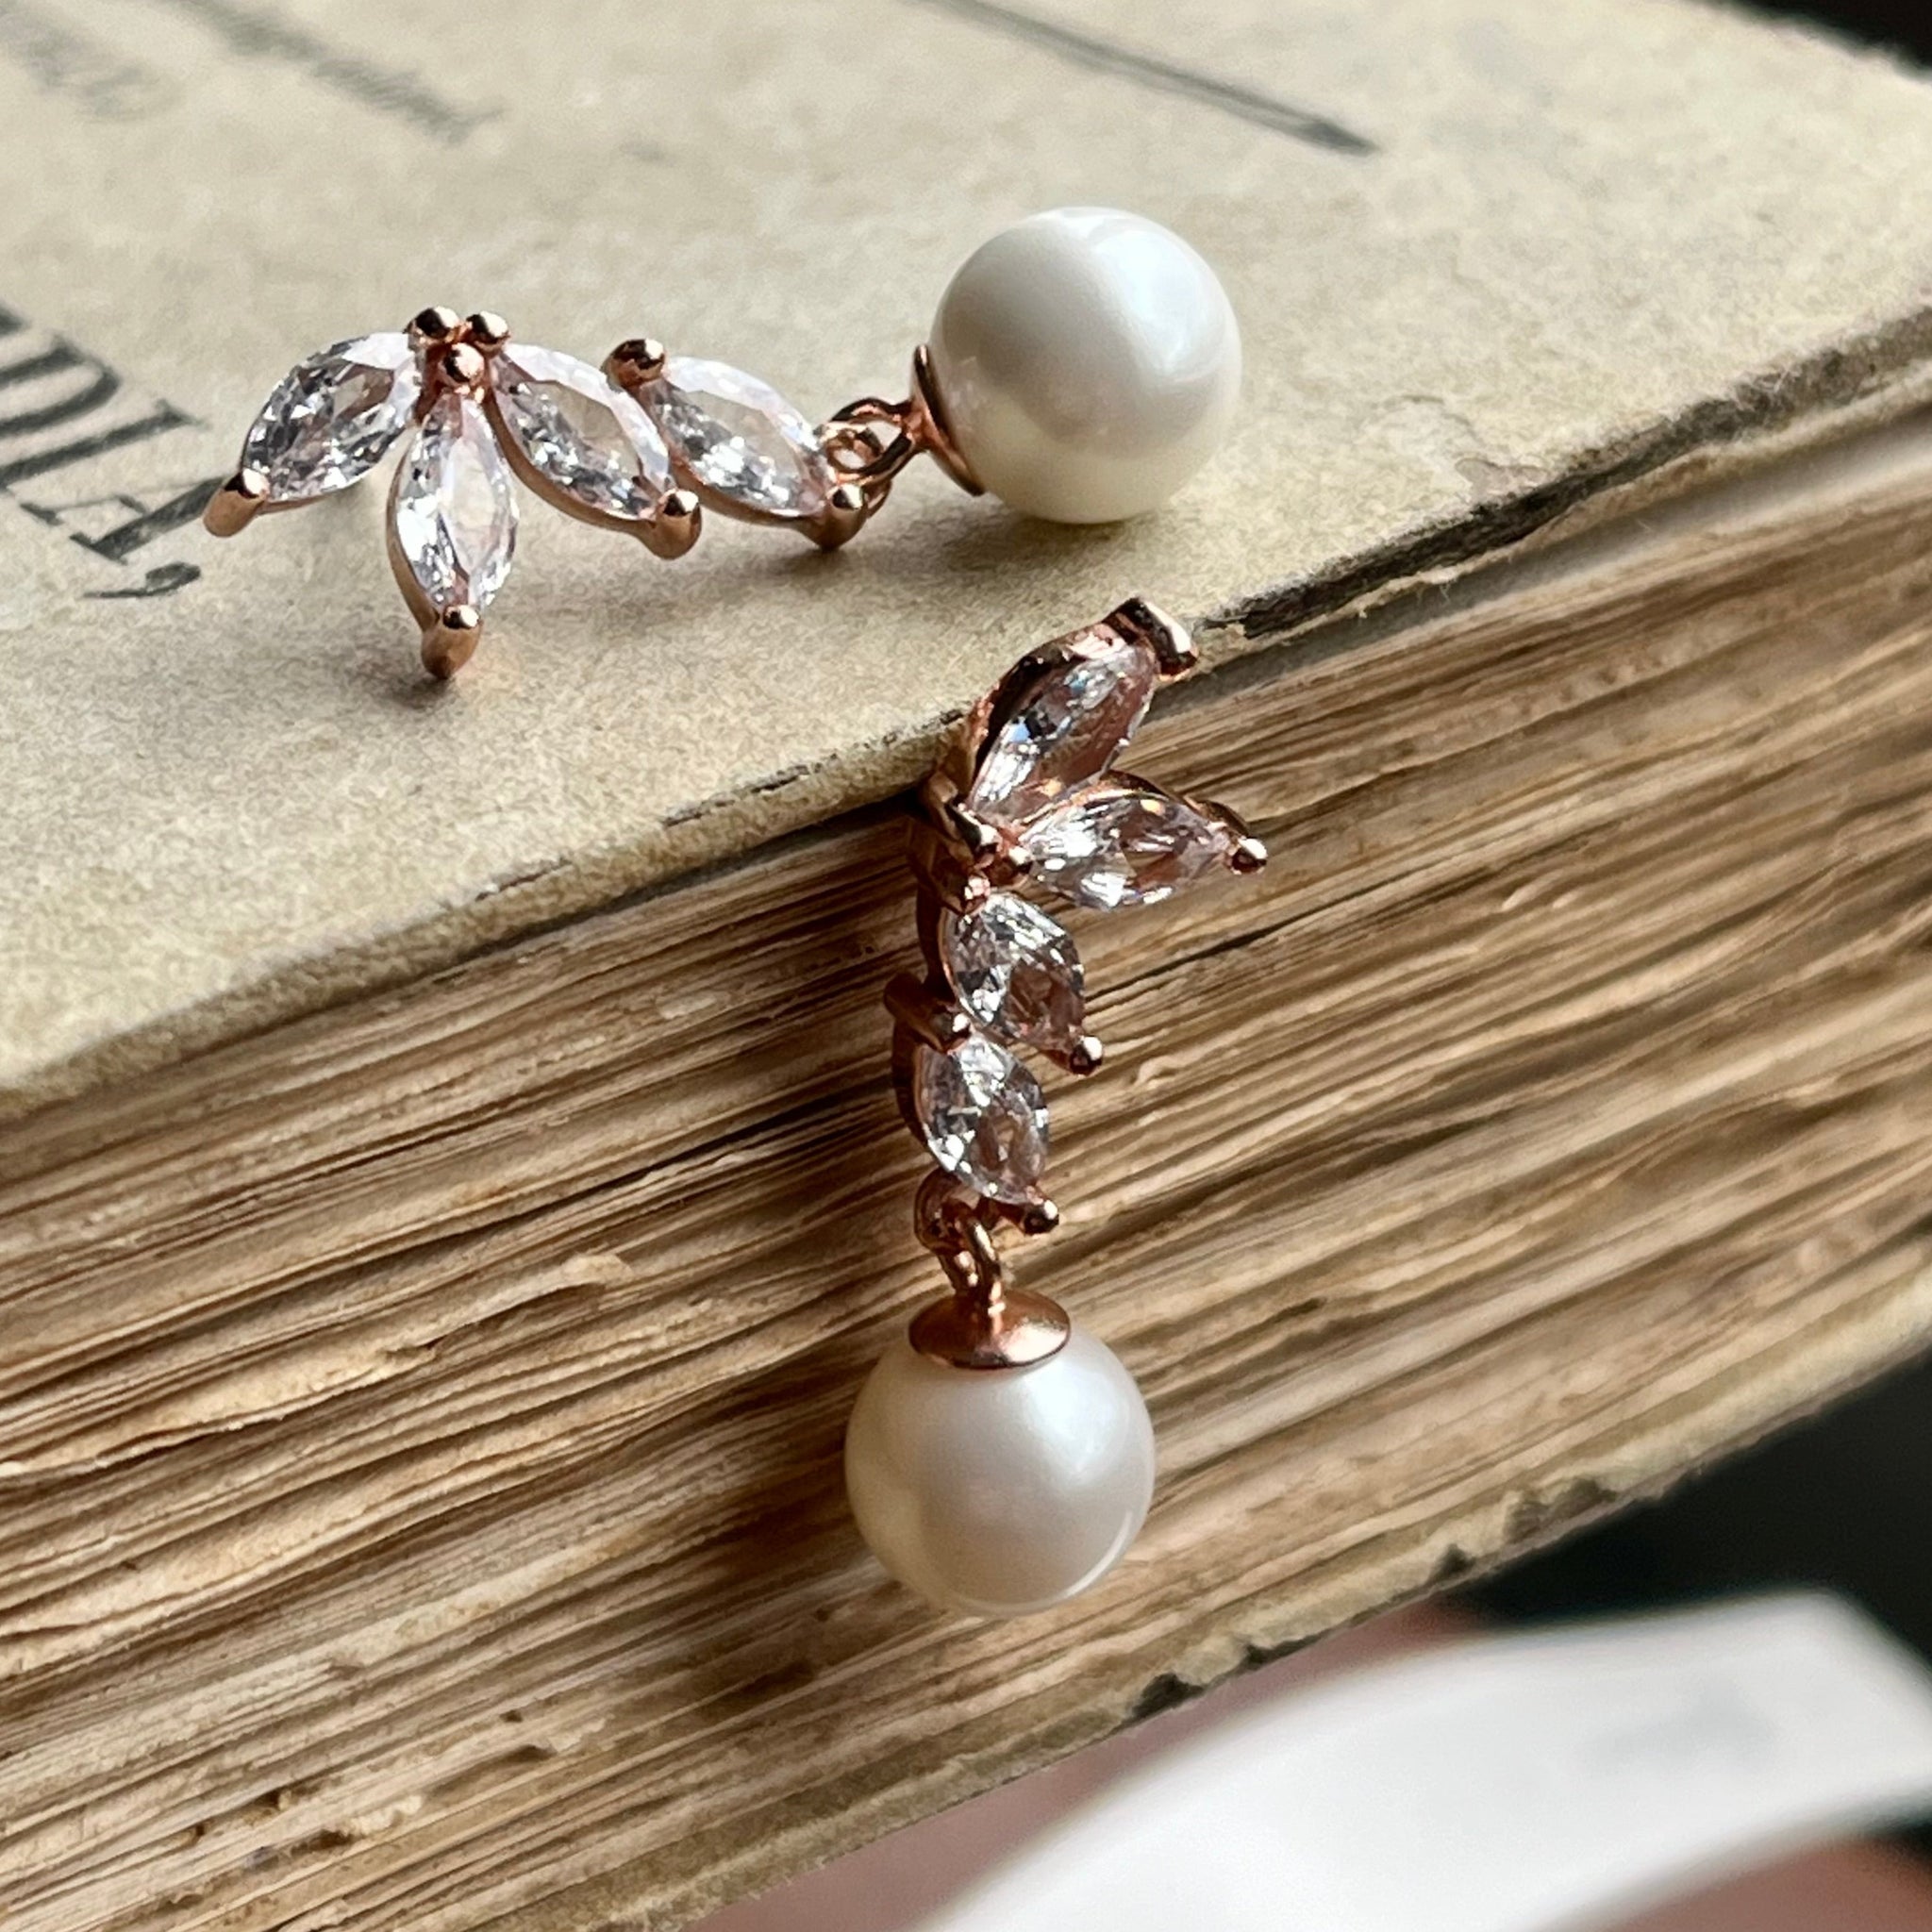 Buy Light Pink Pearl Stud Earrings, Rose Gold Earrings, Bridal Pearl  Earrings, Rosaline Pearl Studs, 14K Gold Filled, Gifts Under 20 Online in  India - Etsy